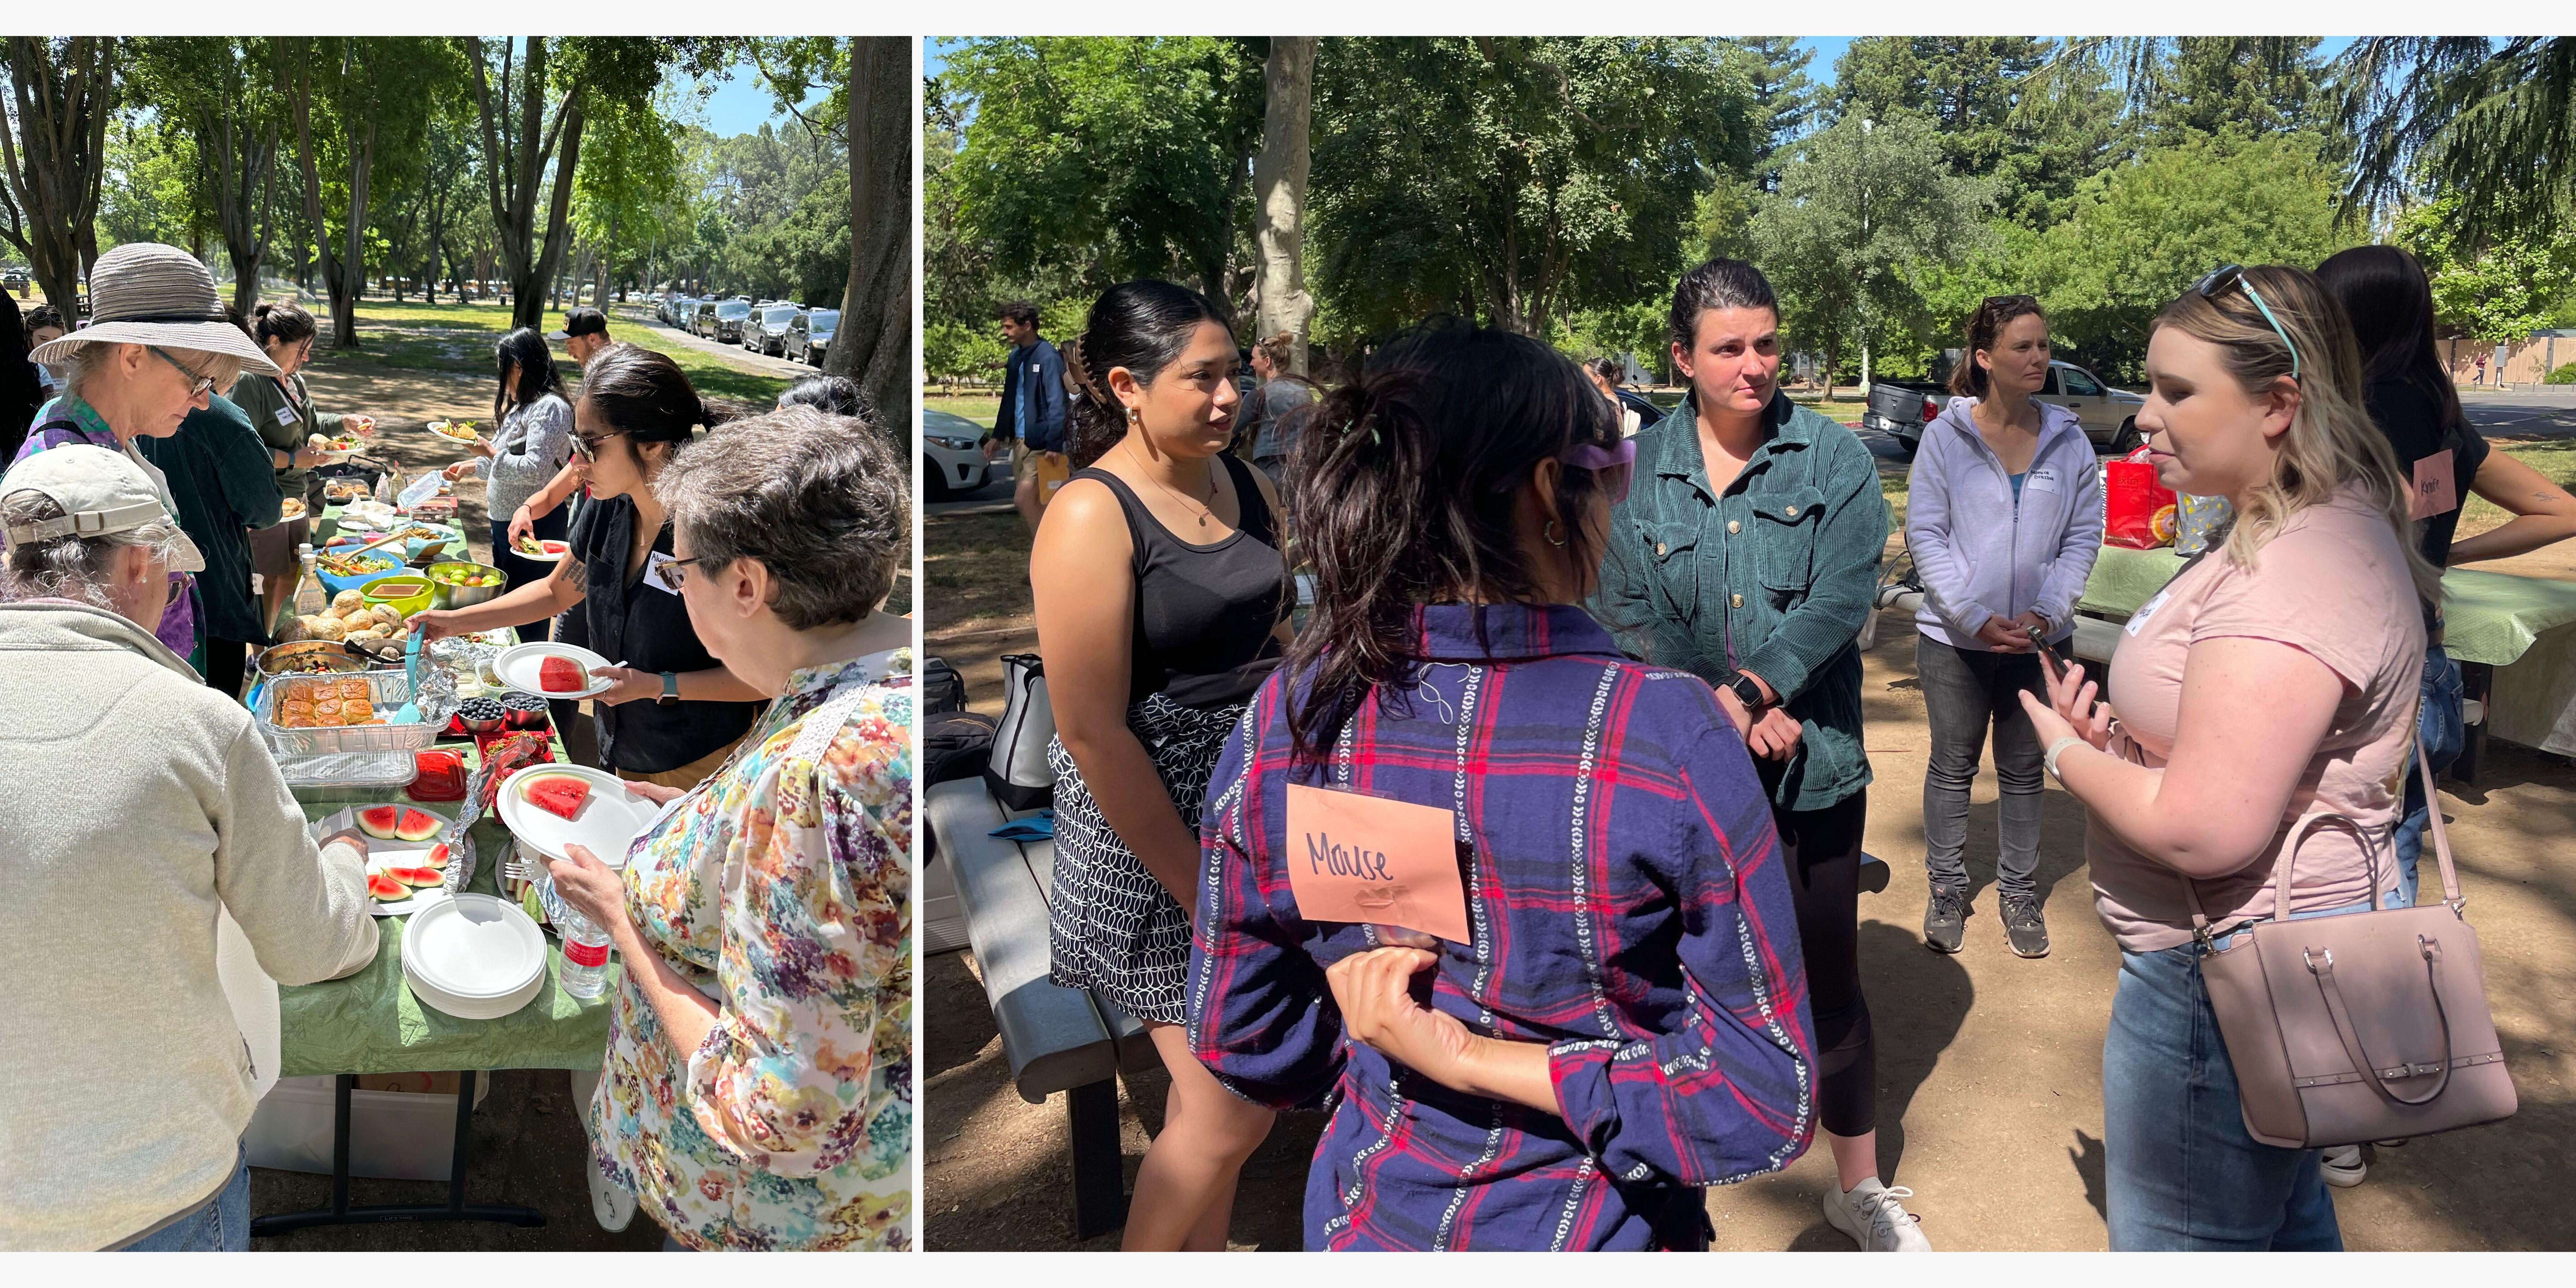 UCCE Capitol Corridor hosted a potluck and team bonding event at the local zoo thanks to EEEC funds. Photos by Annalise Traub.